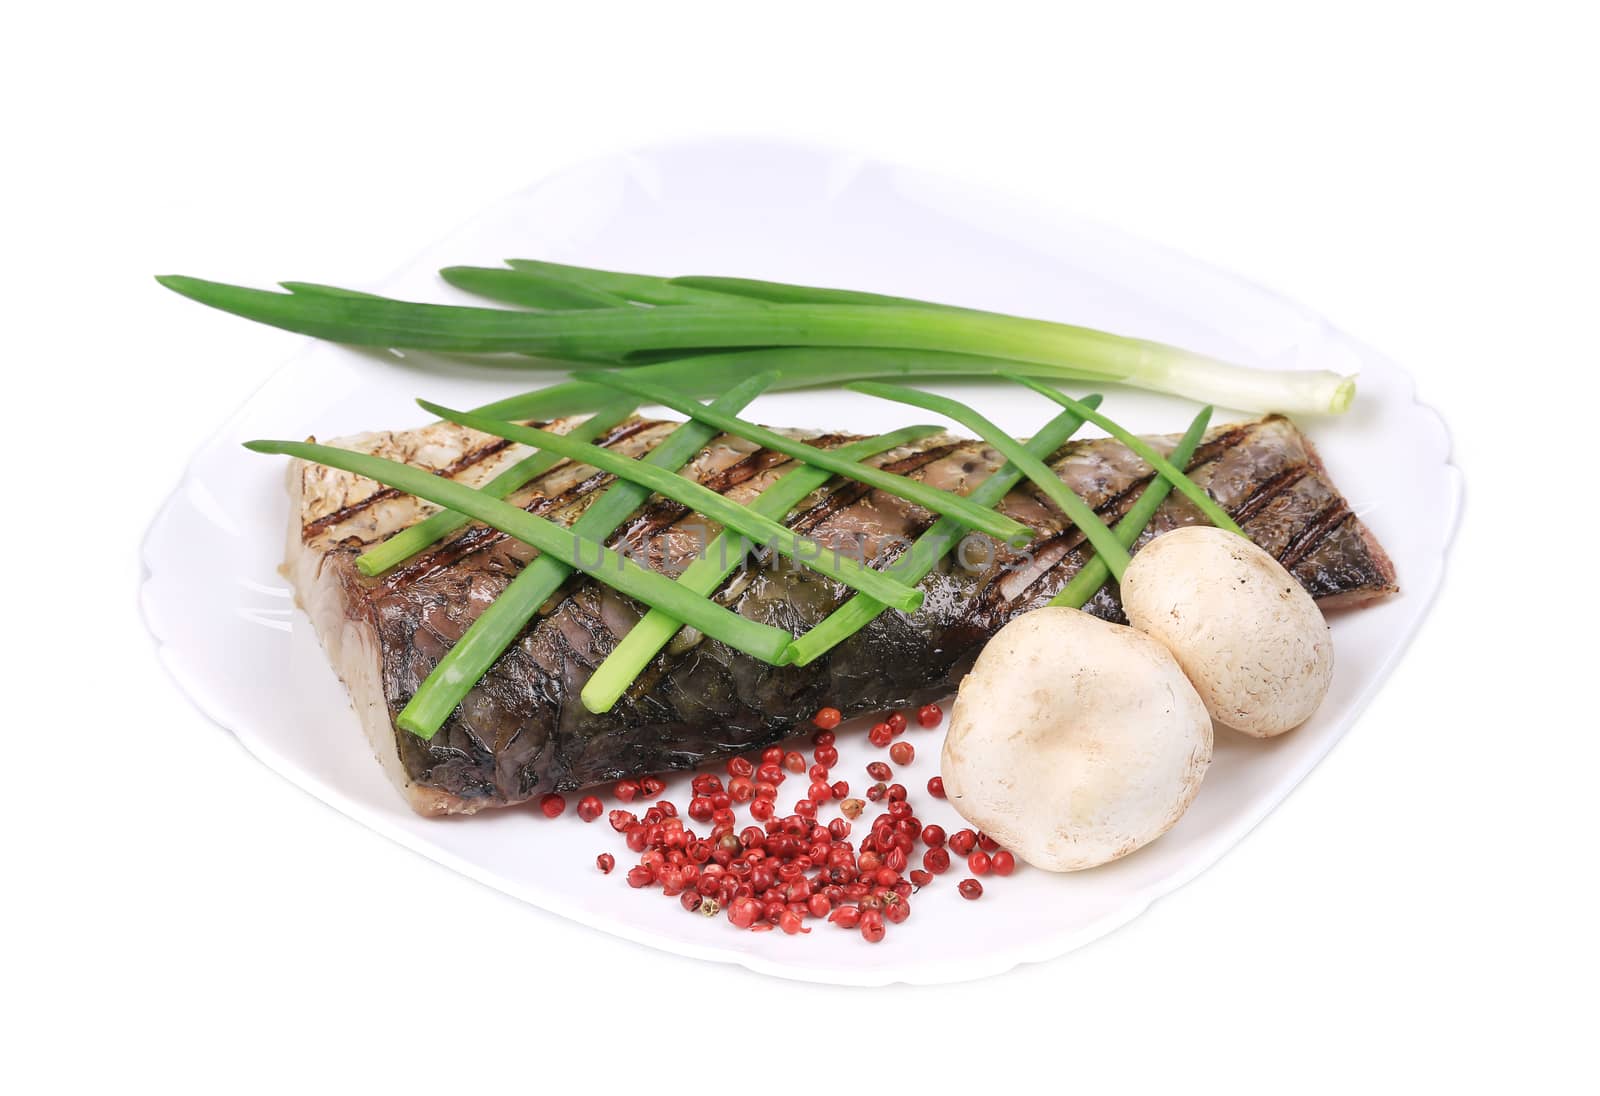 Grilled fish with green onions. Isolated on a white background.